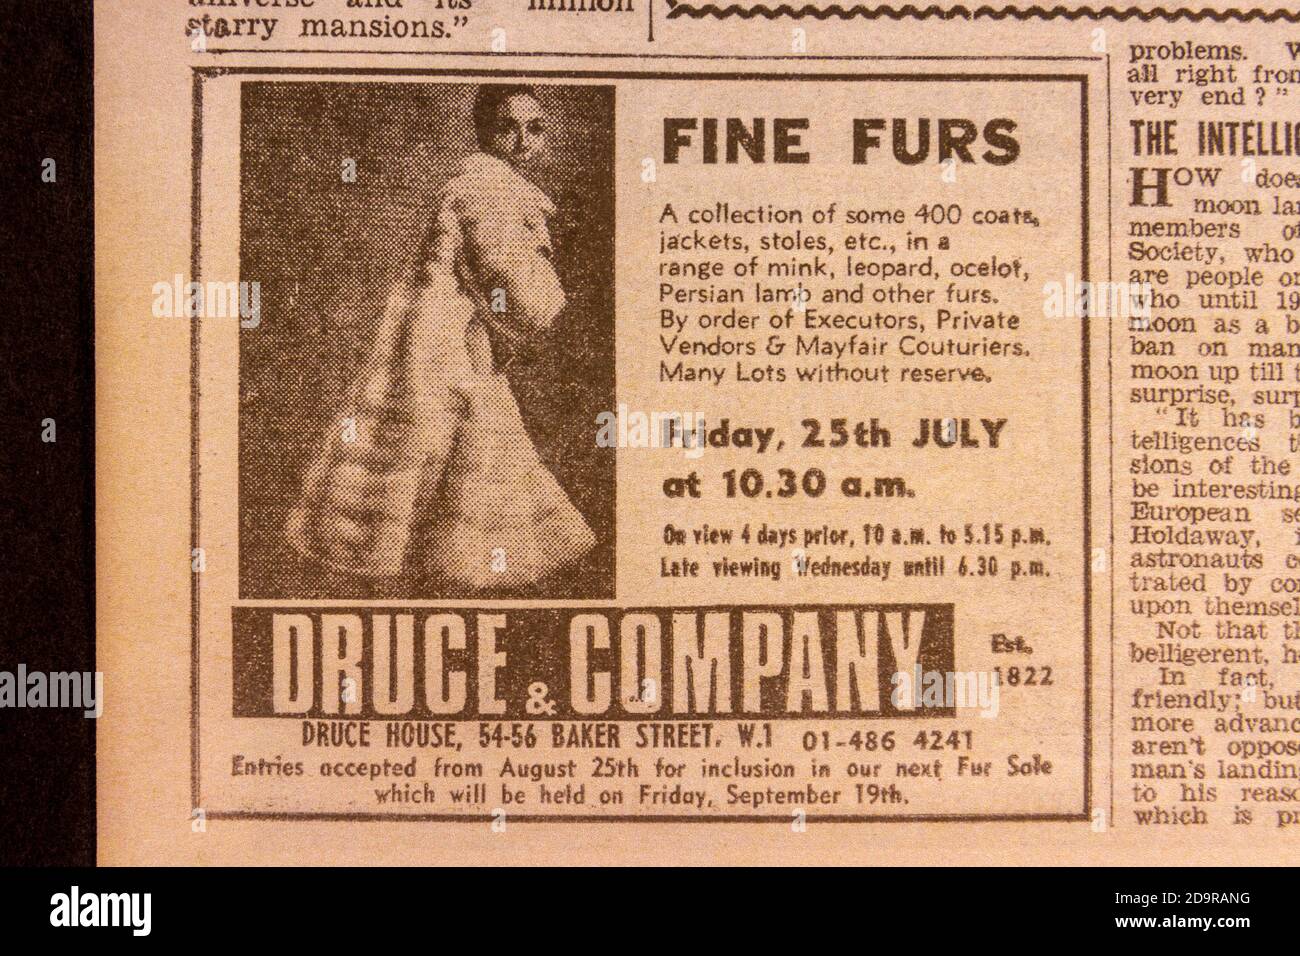 Advert for fine furs Druce & Company inside an Evening Standard souvenir newspaper (replica) for the Apollo 11 Moon landings on 21st July 1969. Stock Photo